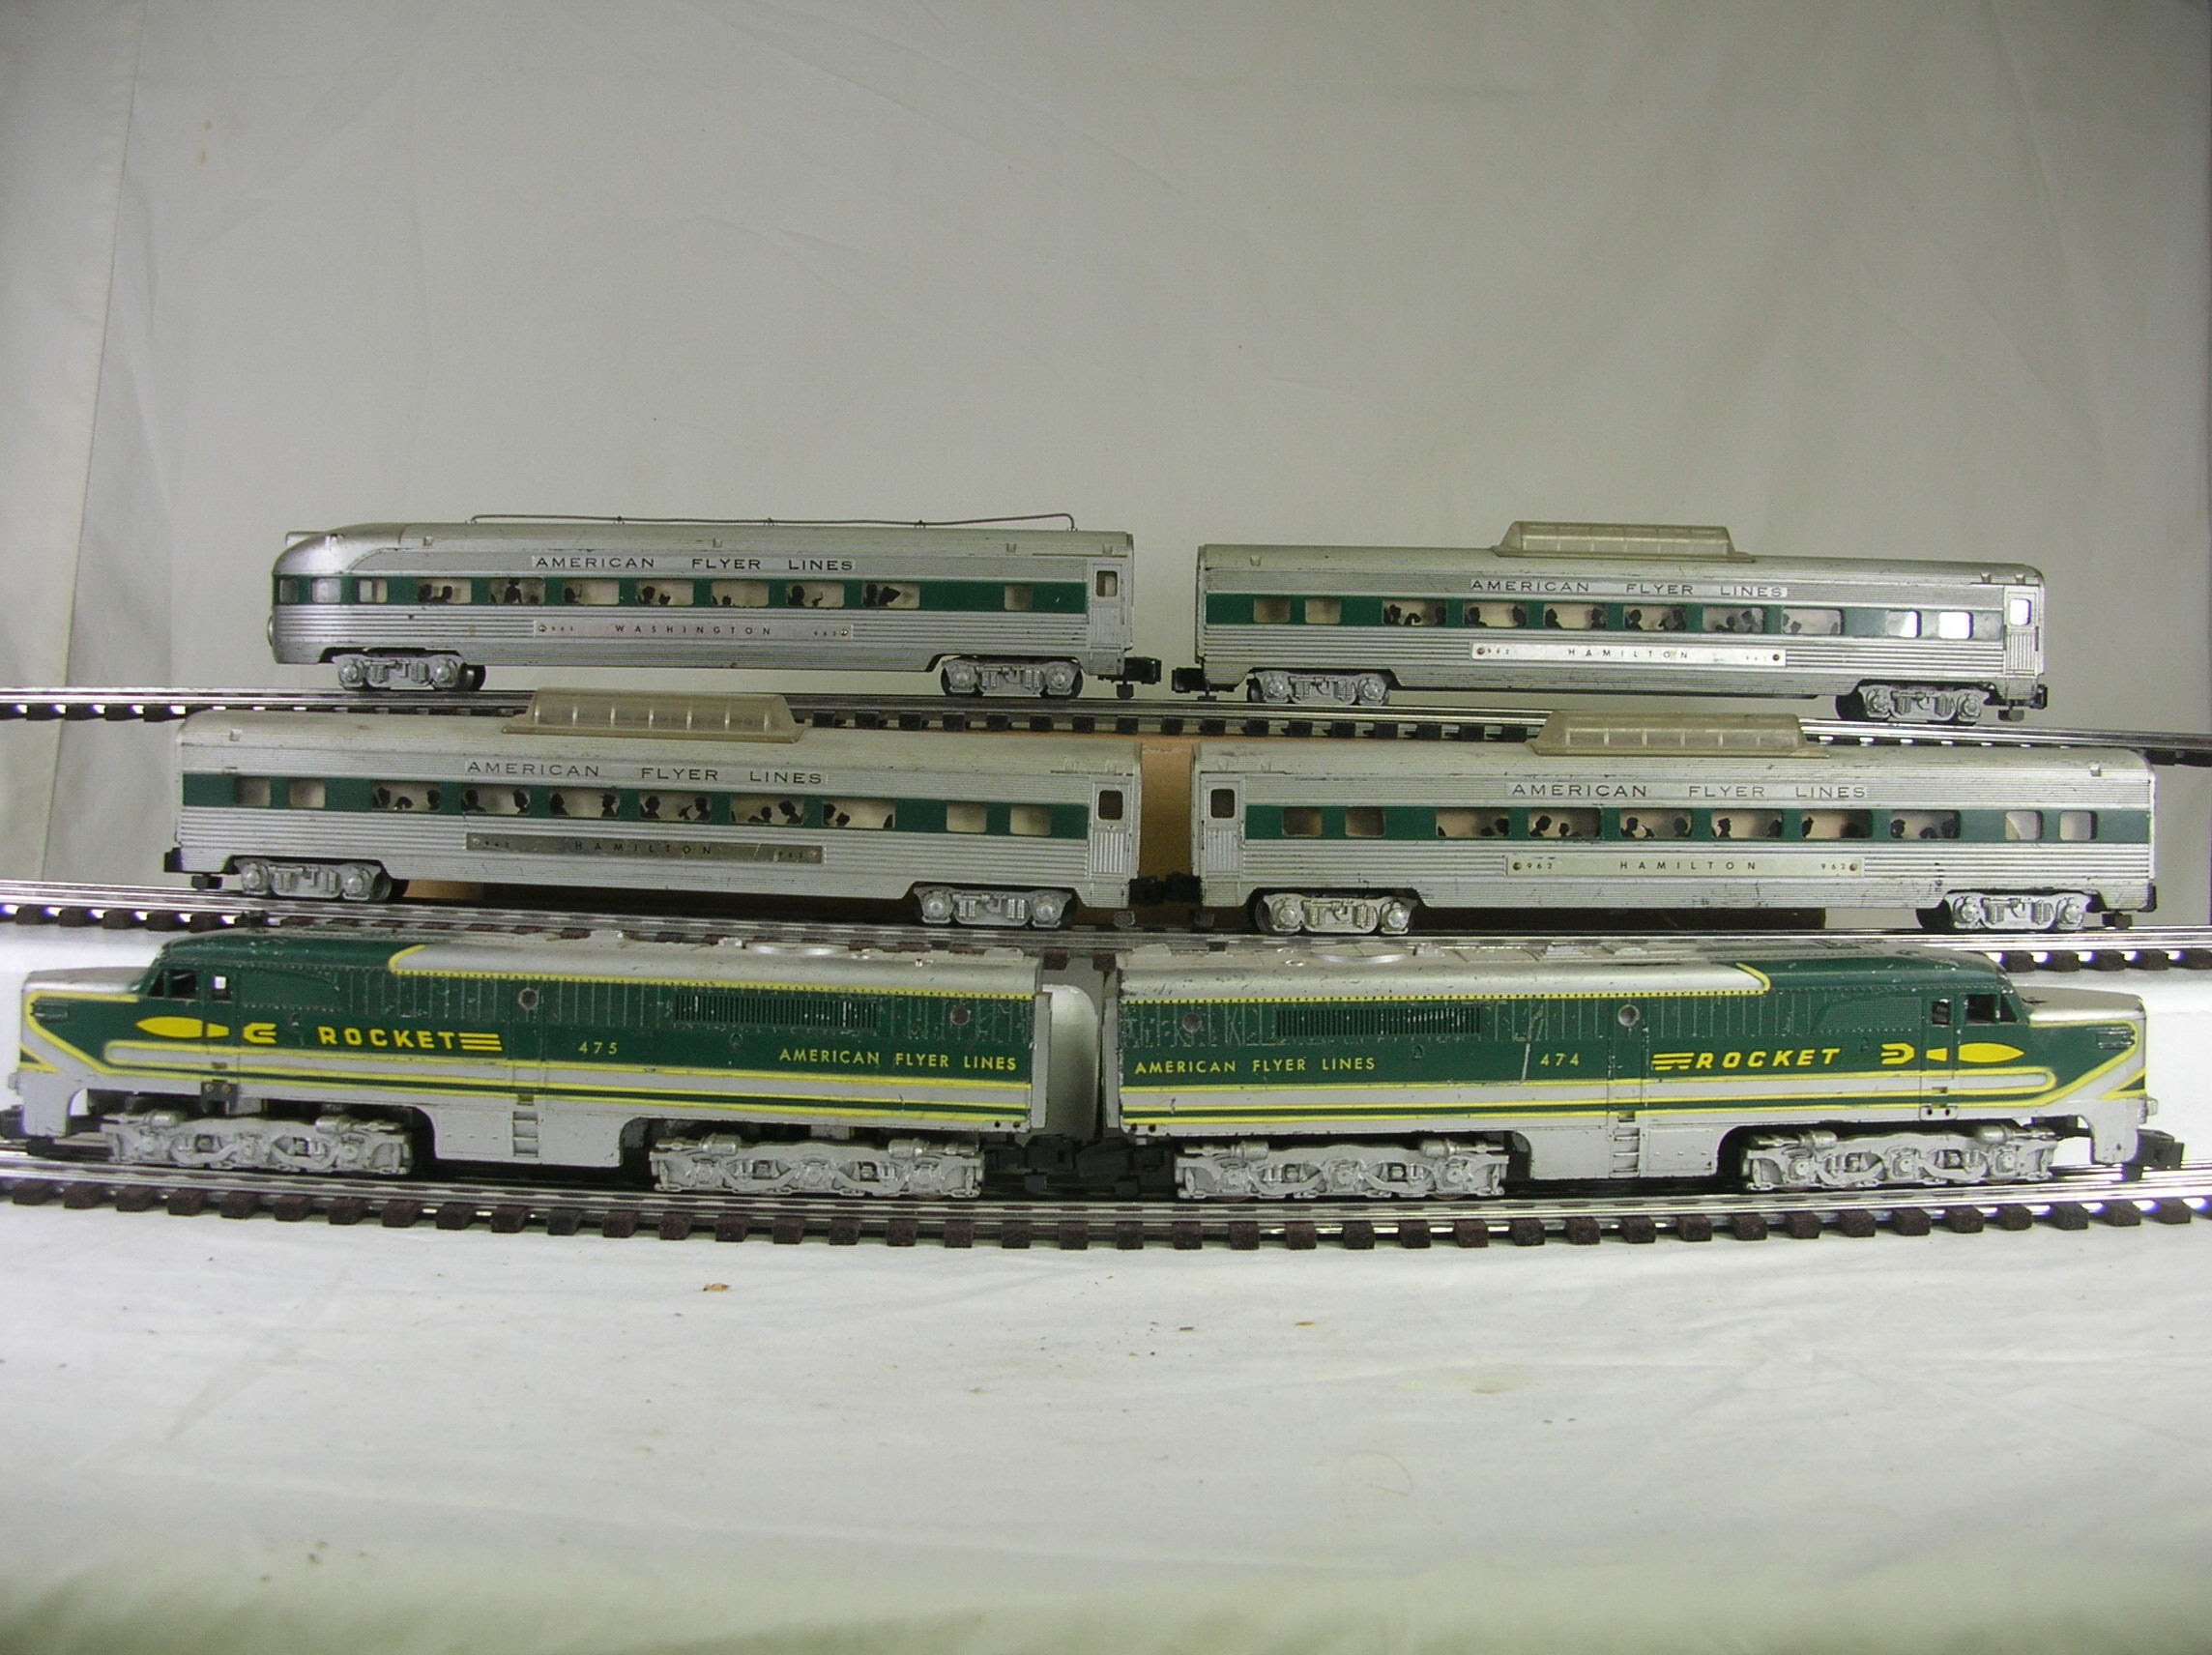 This is a great representation of the train from the movie. American Flyer Consignments